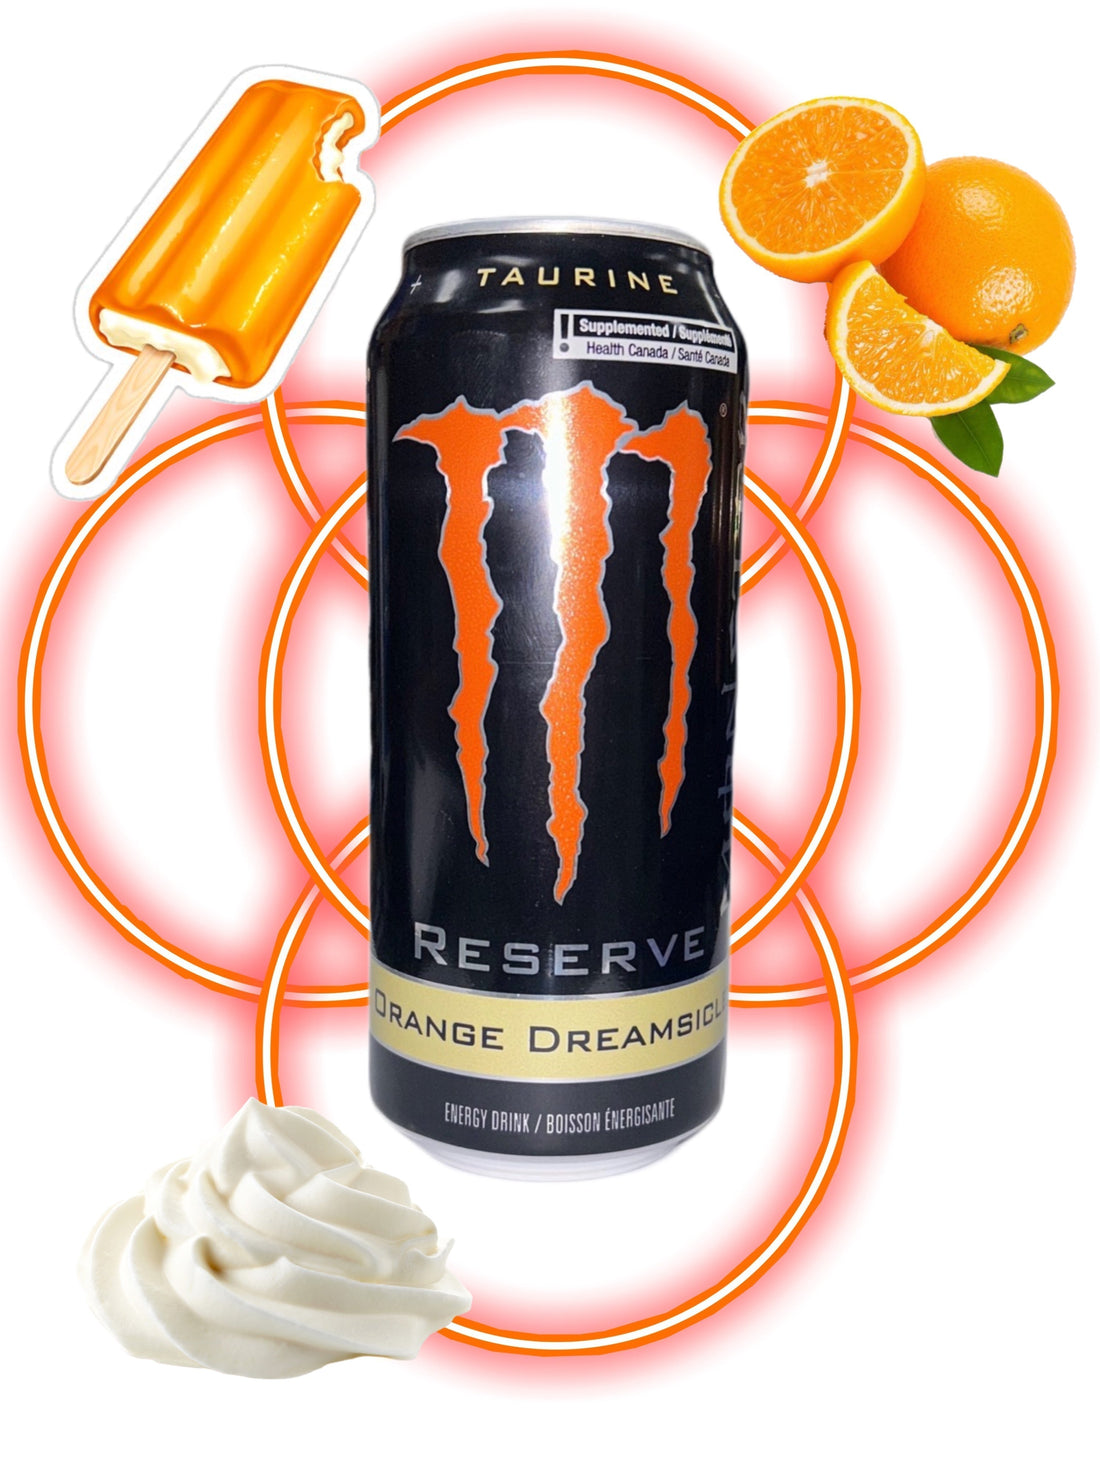 Monster Reserve Energy Orange Dreamsicle Review: A Refreshing Fusion of Flavors - Extreme Snacks